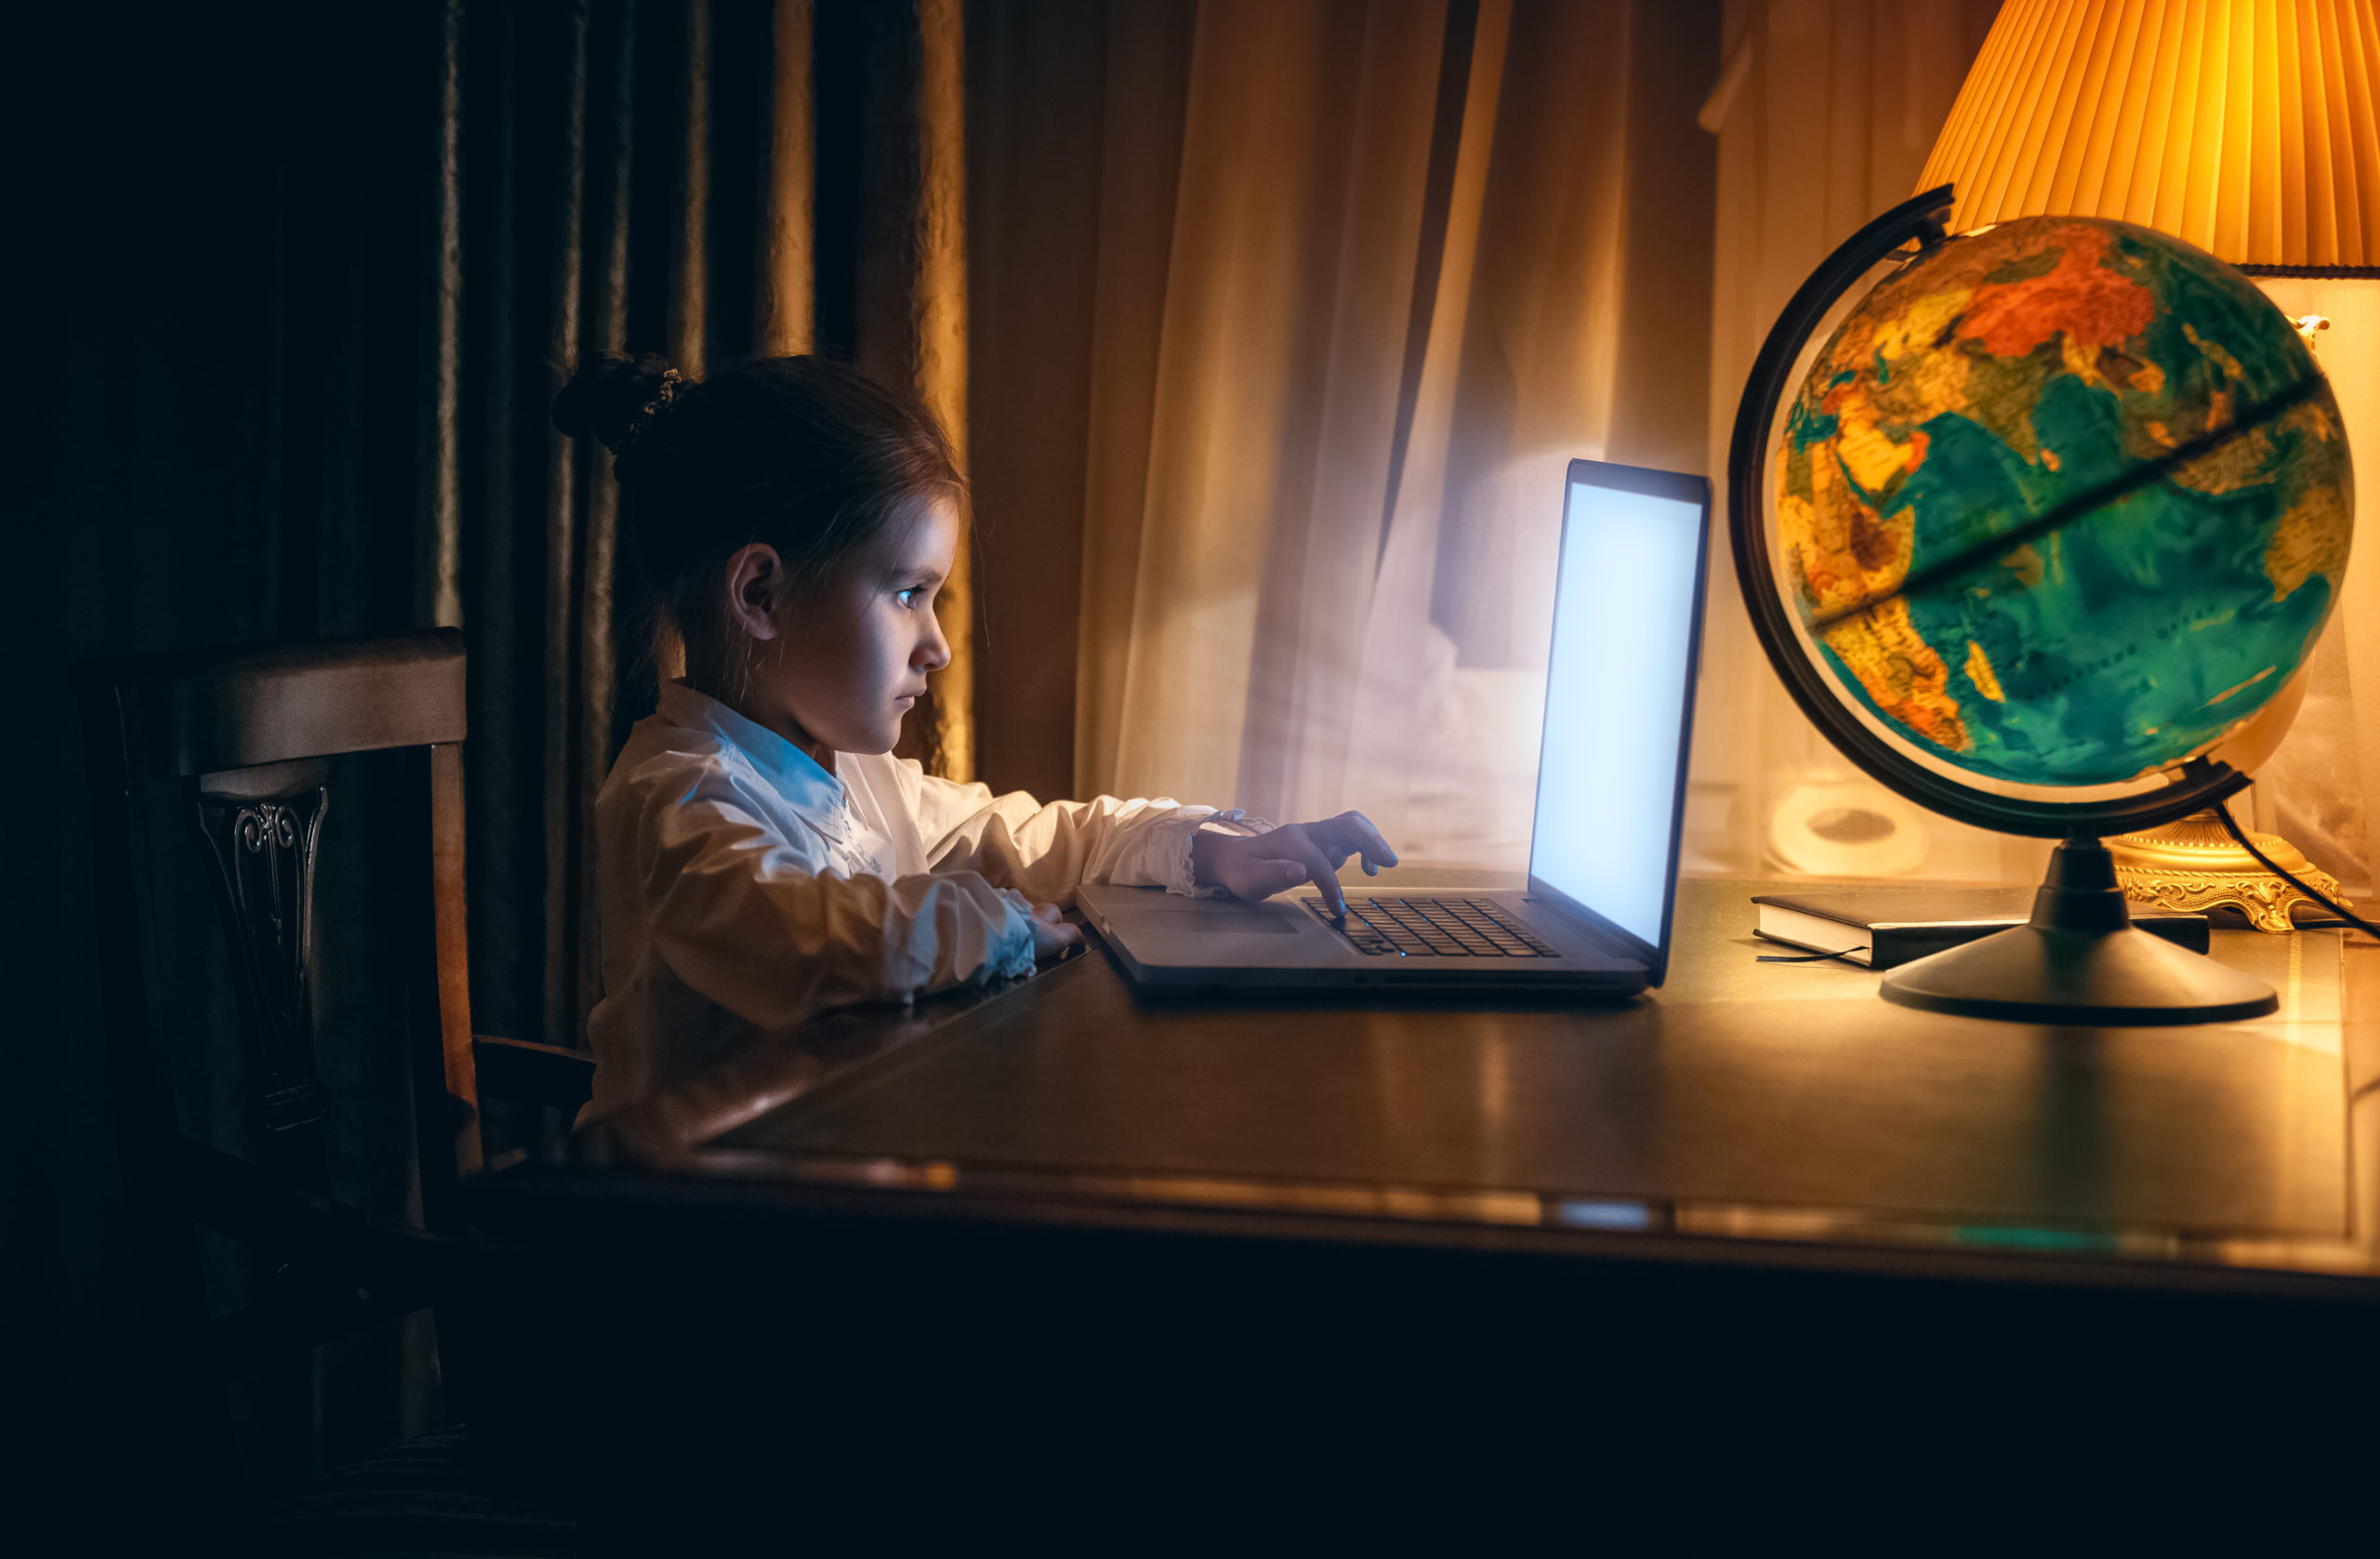 Need parental controls? Here are 5 signs you do